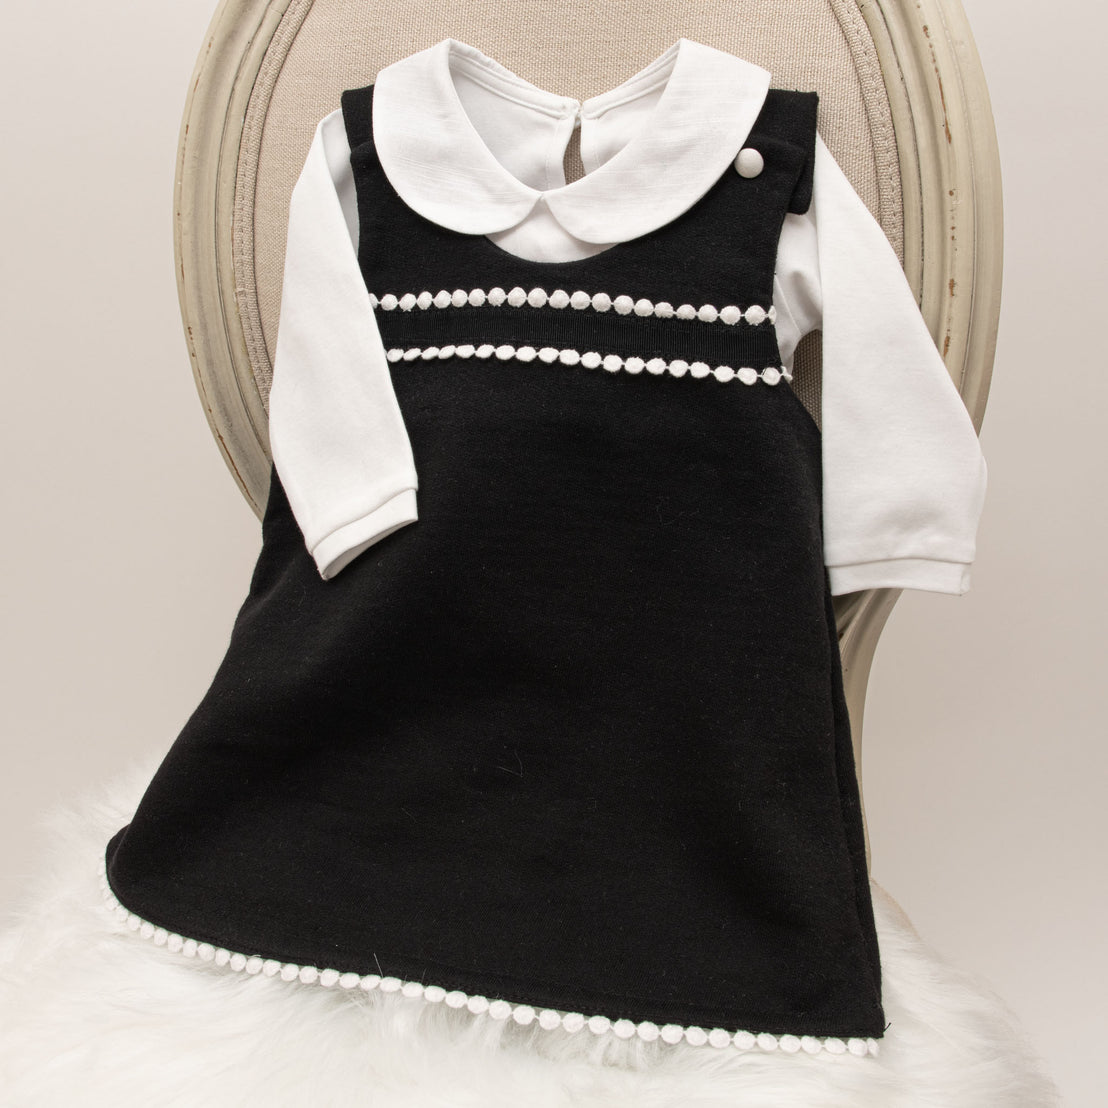 A June Jumper Dress Set with a white collar and pearl detailing on display, draped over a fuzzy, white fabric on a round chair. The dress features a simple design with decorative white pearls.